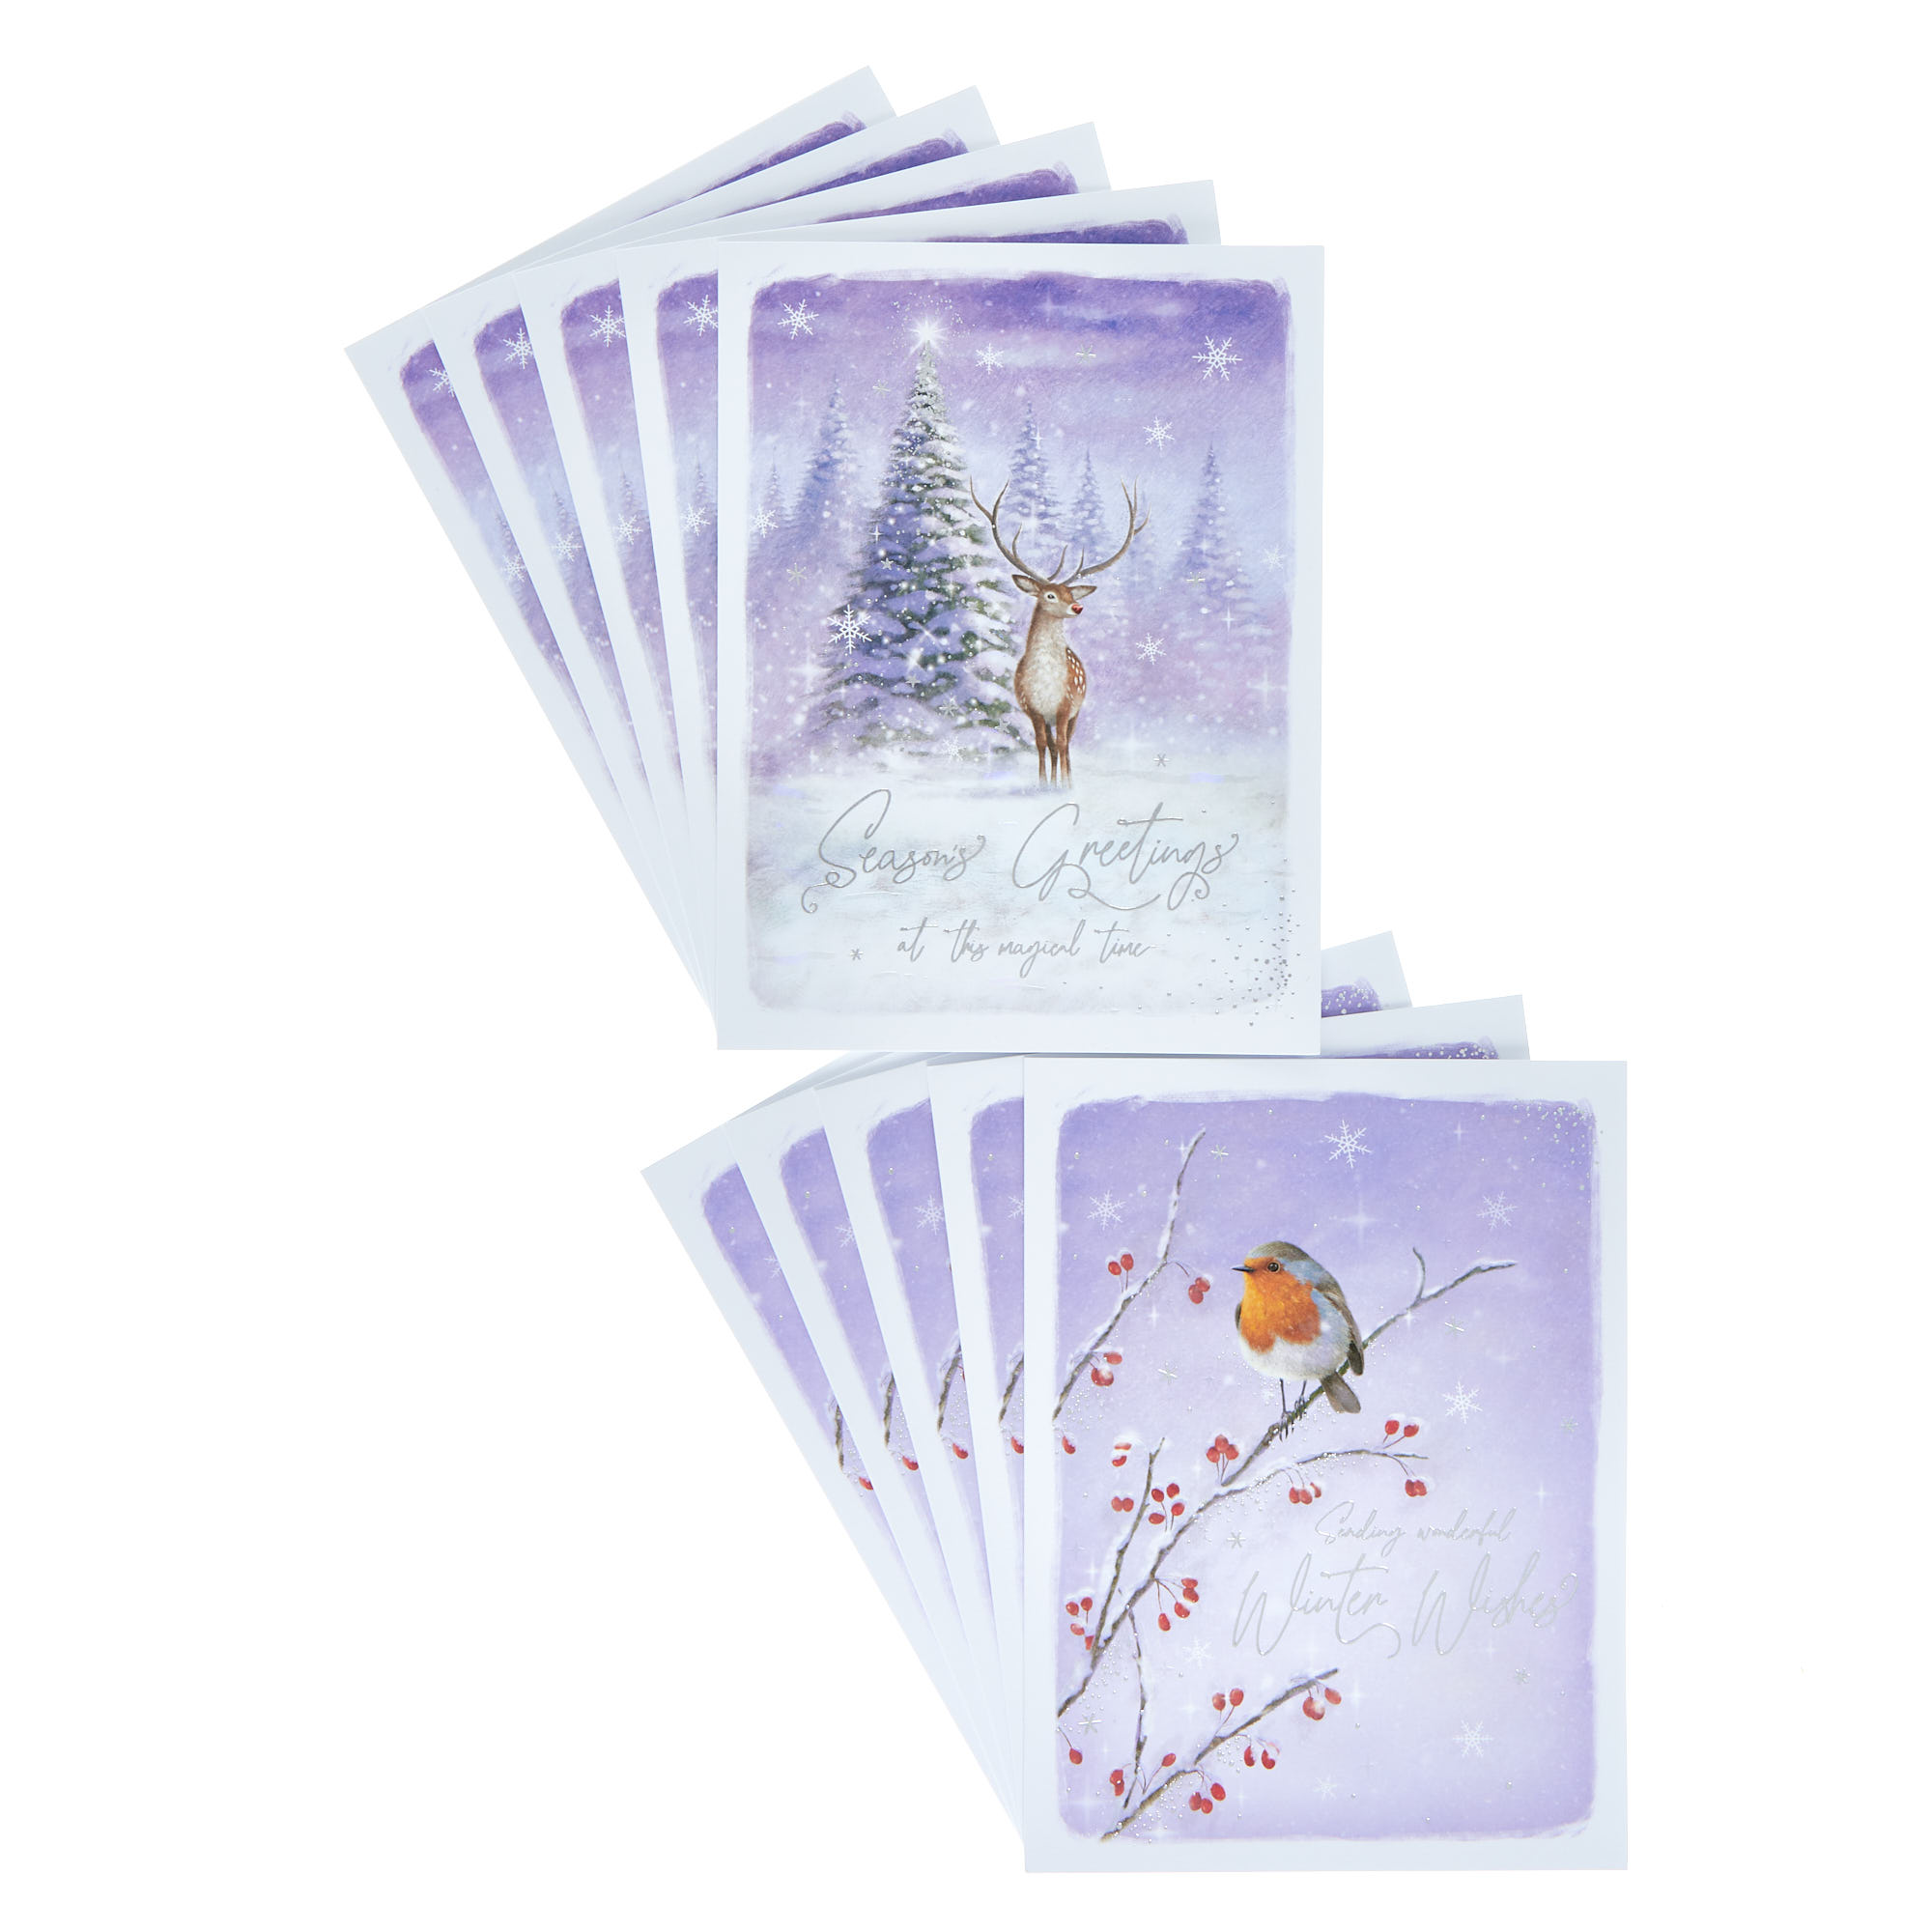 10 Deluxe Boxed Charity Christmas Cards - Robin & Stag (2 Designs)